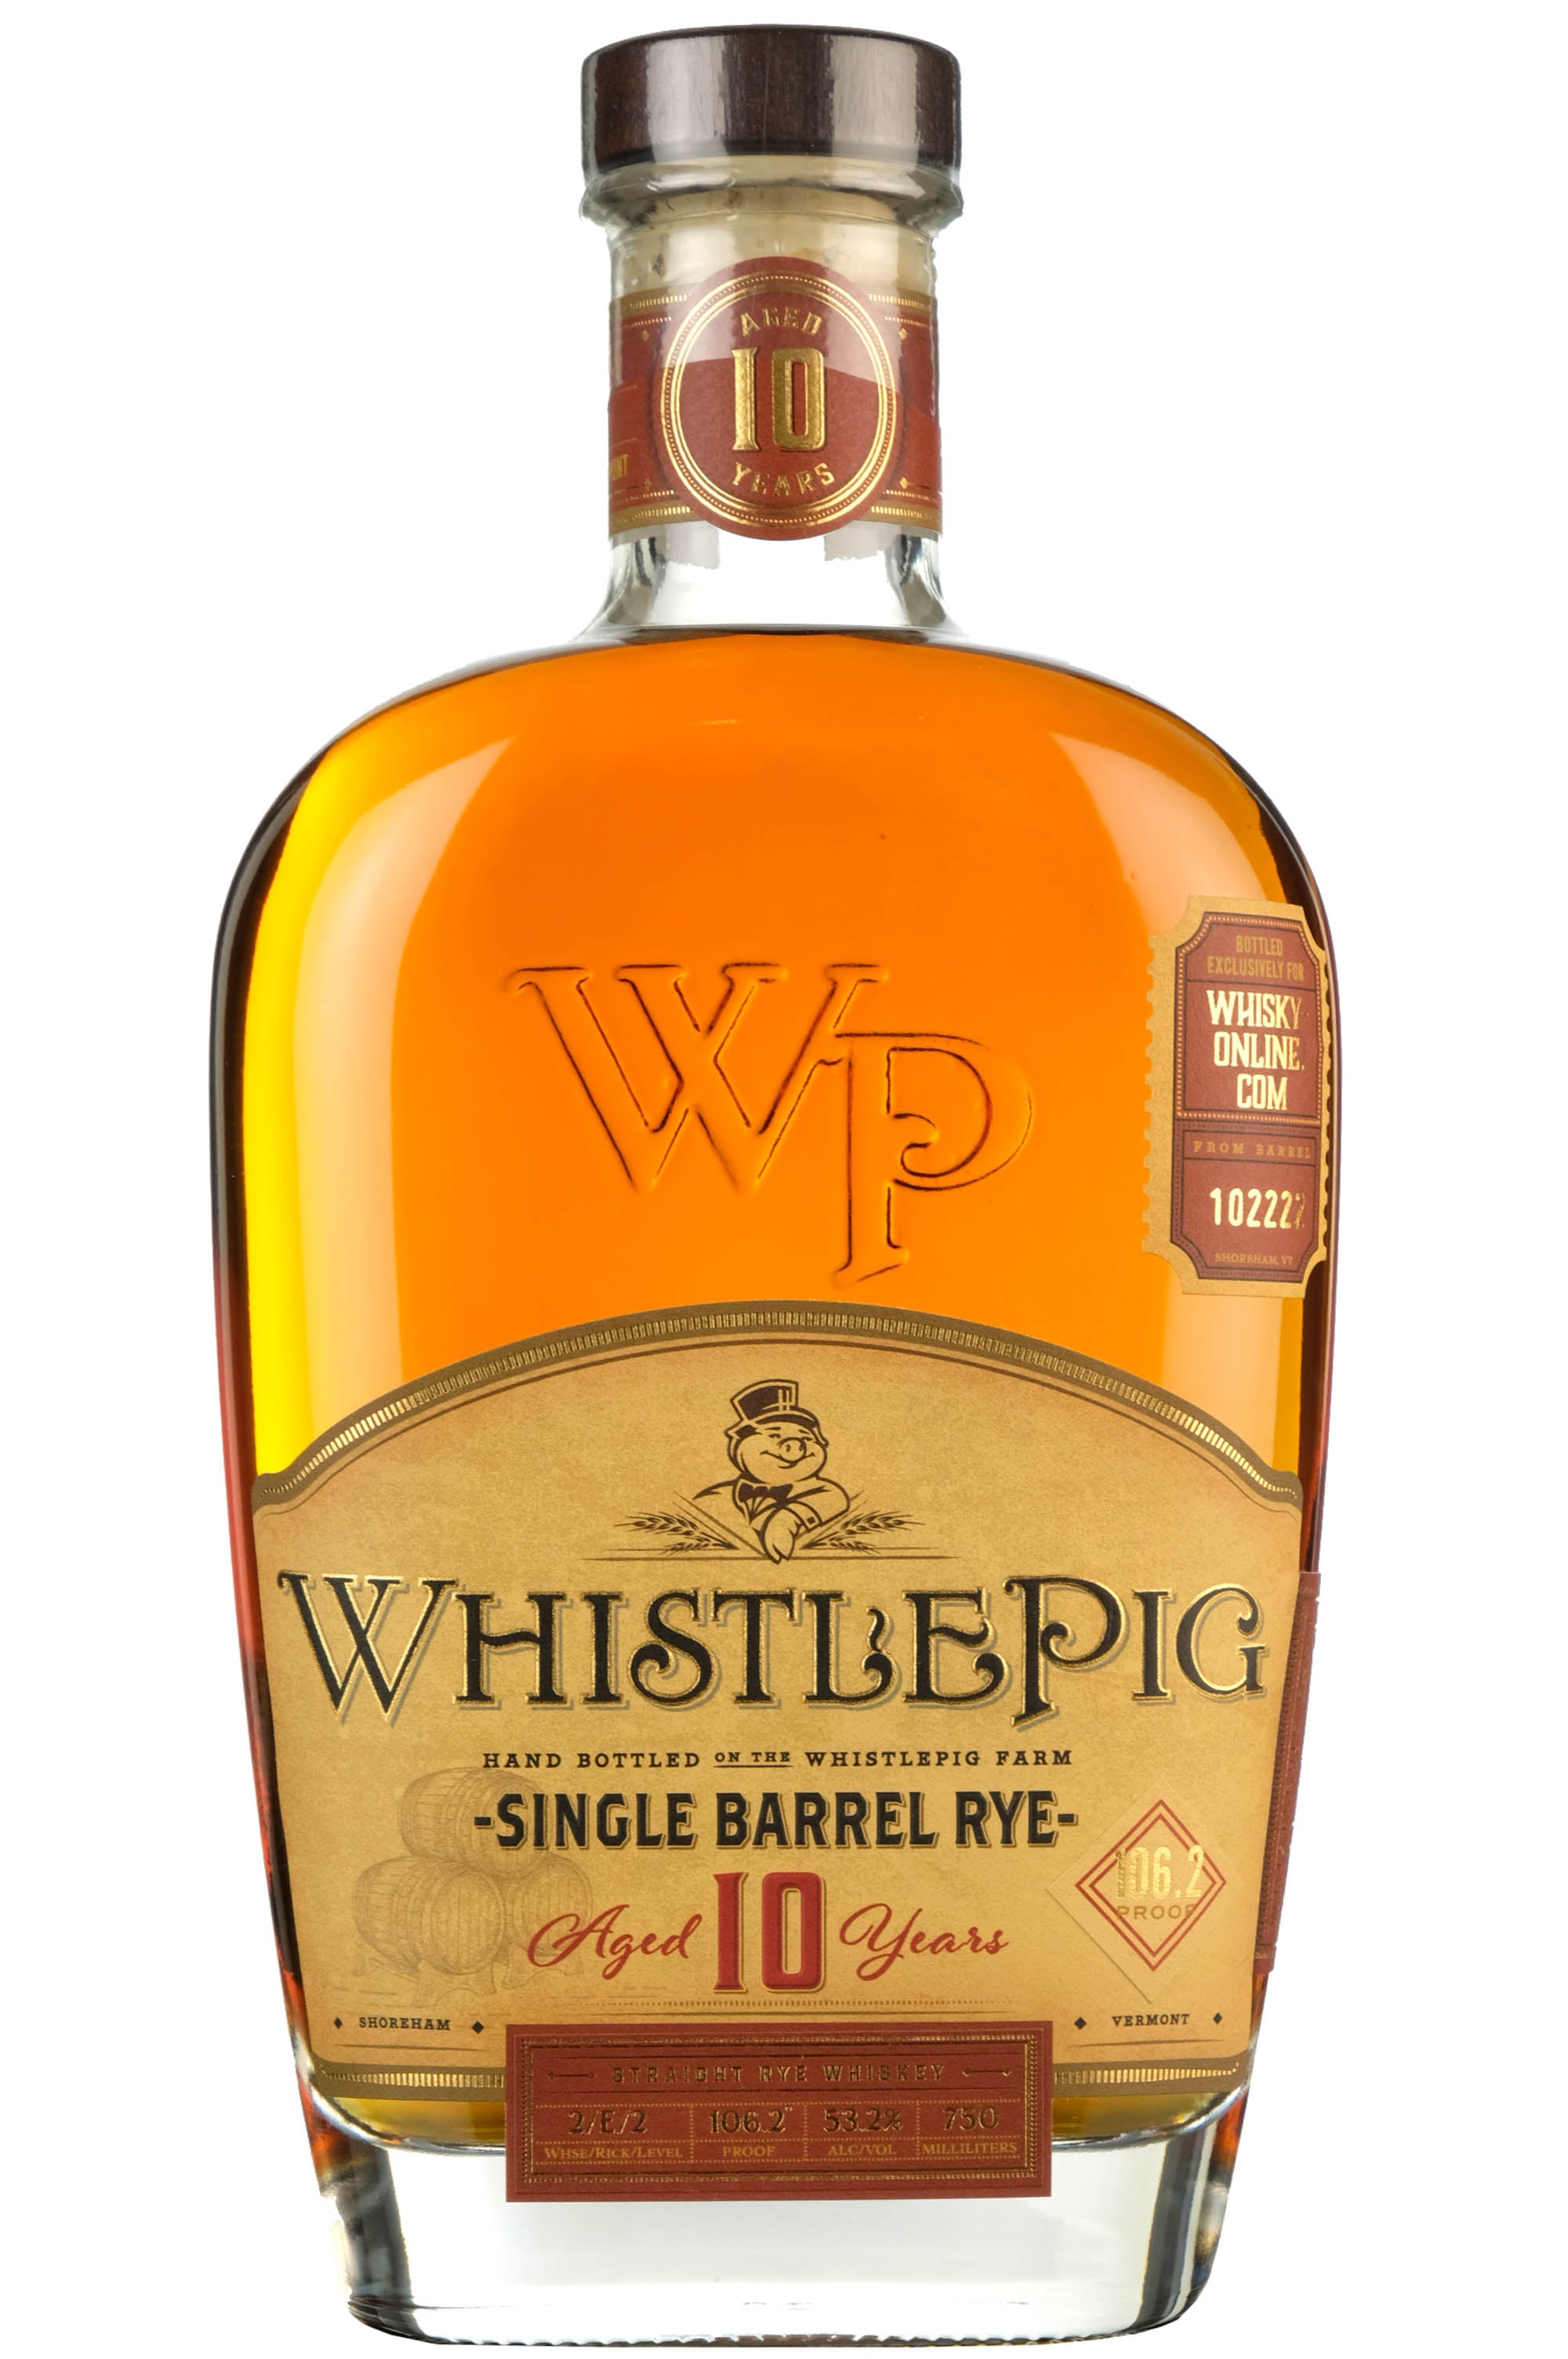 WhistlePig Rye Whiskey 10 Year Old | Barrel Pick 102222 | Whisky-Online Exclusive